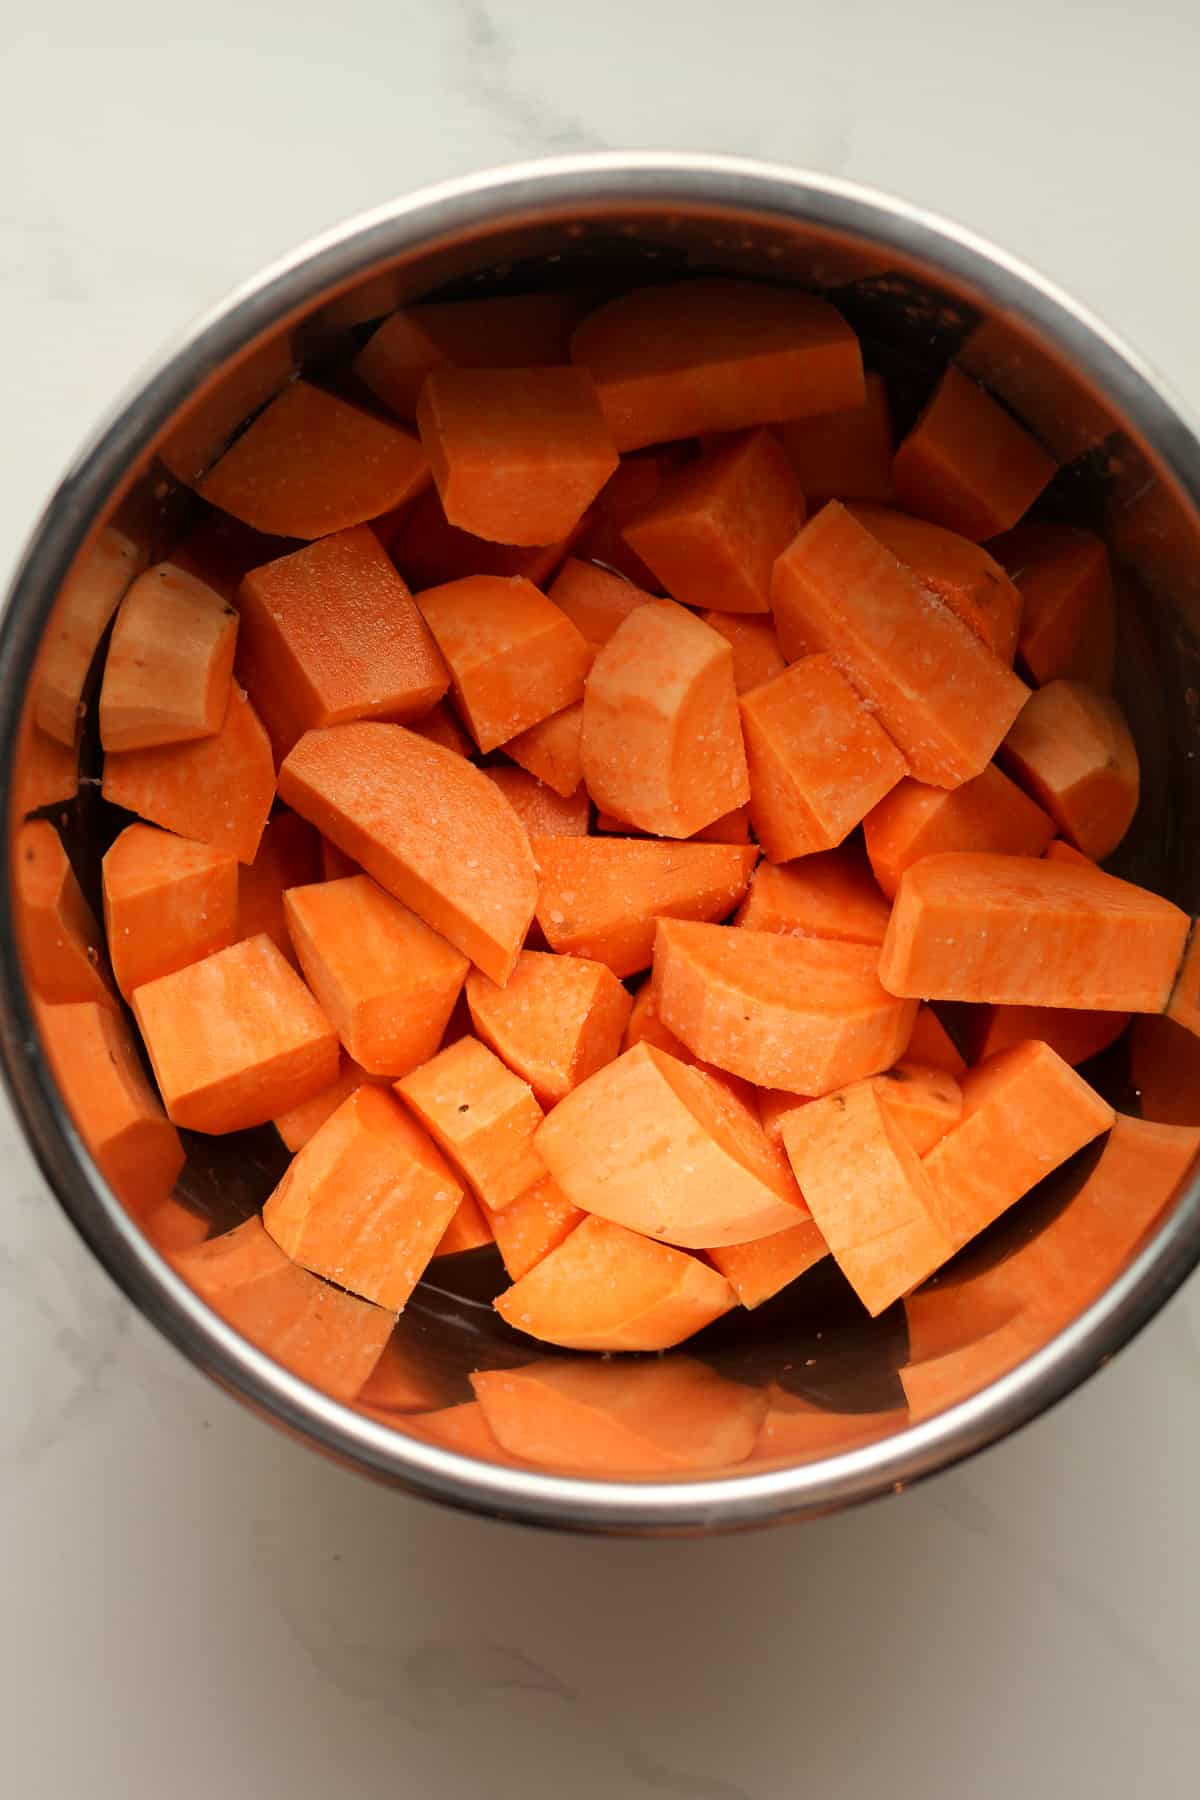 An instant pot with the chopped sweet potatoes.